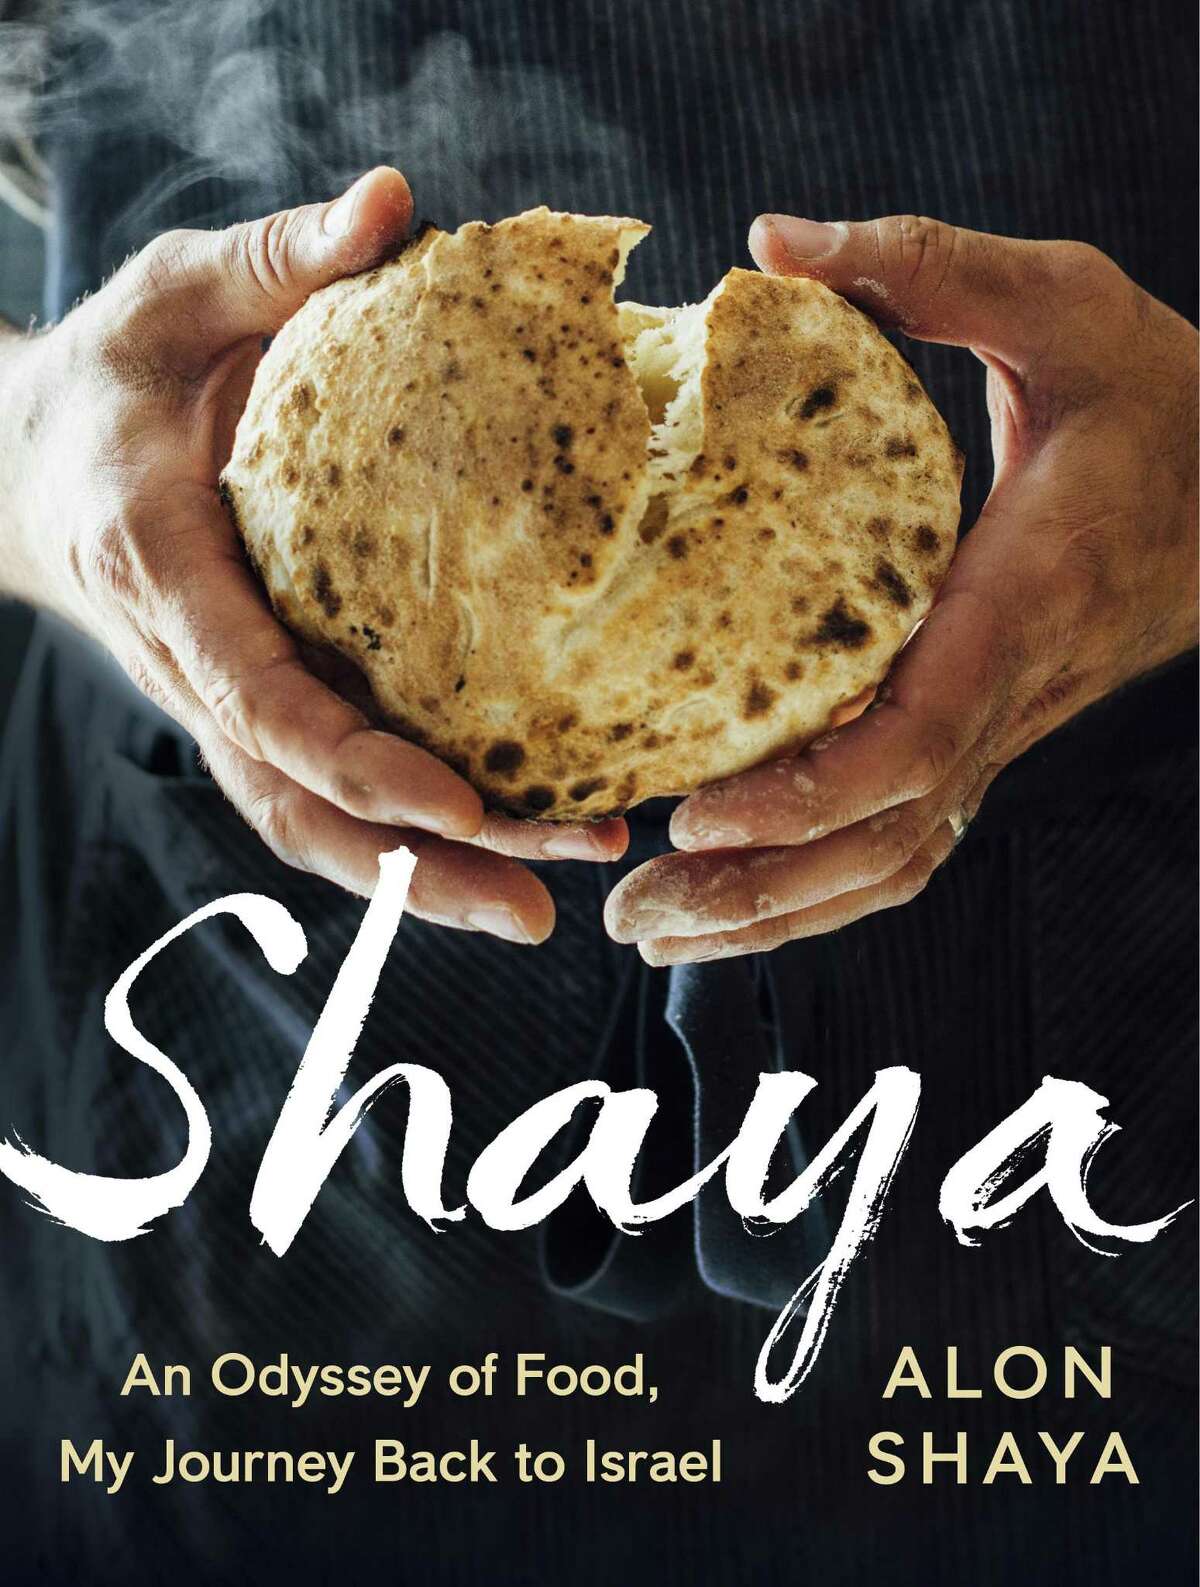 "Shaya: An Odyssey of Food, My Journey Back to Israel" by Alon Shaya (Alfred A. Knopf)